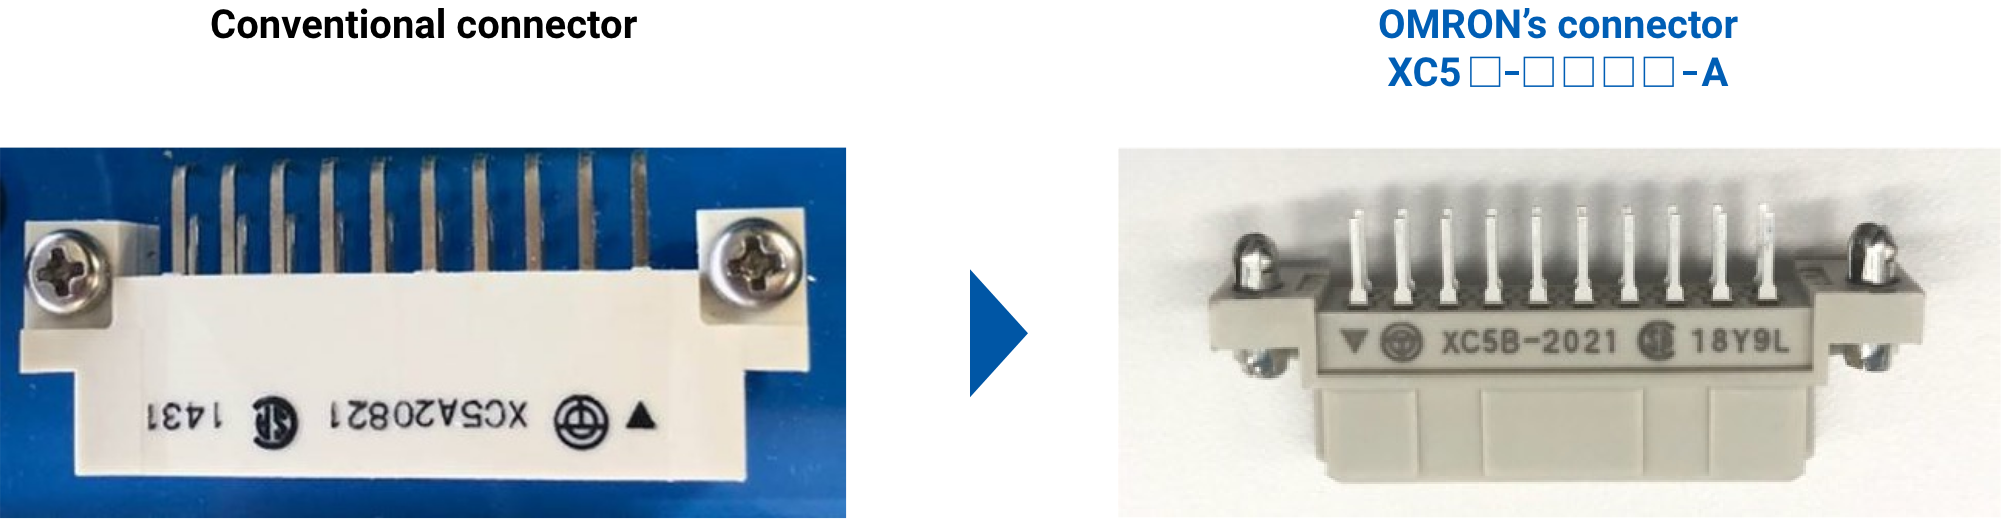 Conventional connector => OMRON's connector XC5□-□□□□-A